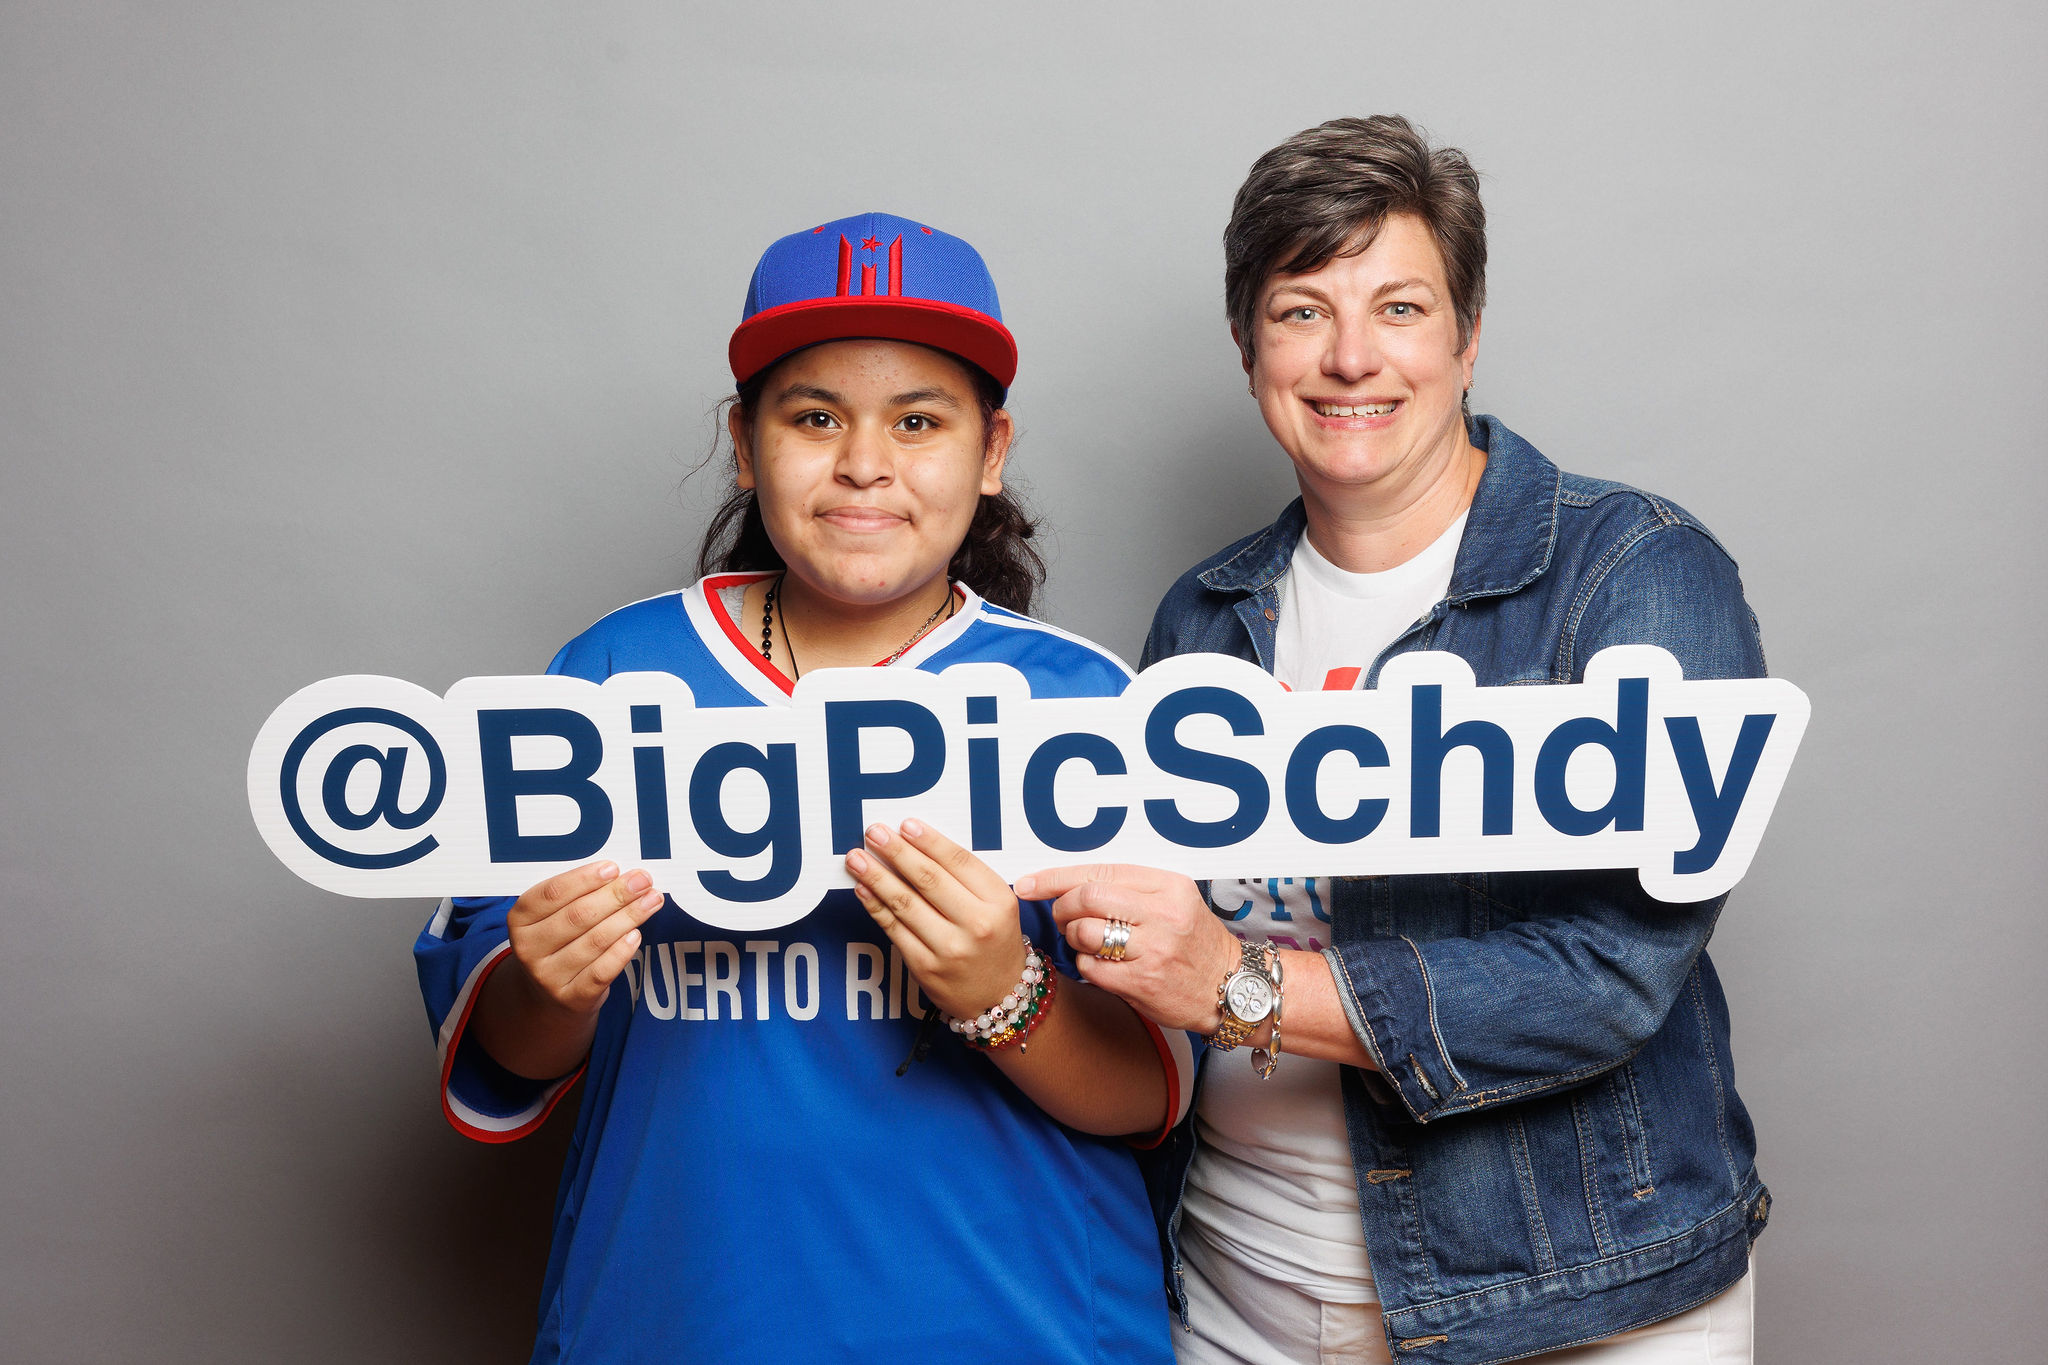 Photo from Big Picture Schenectady launch